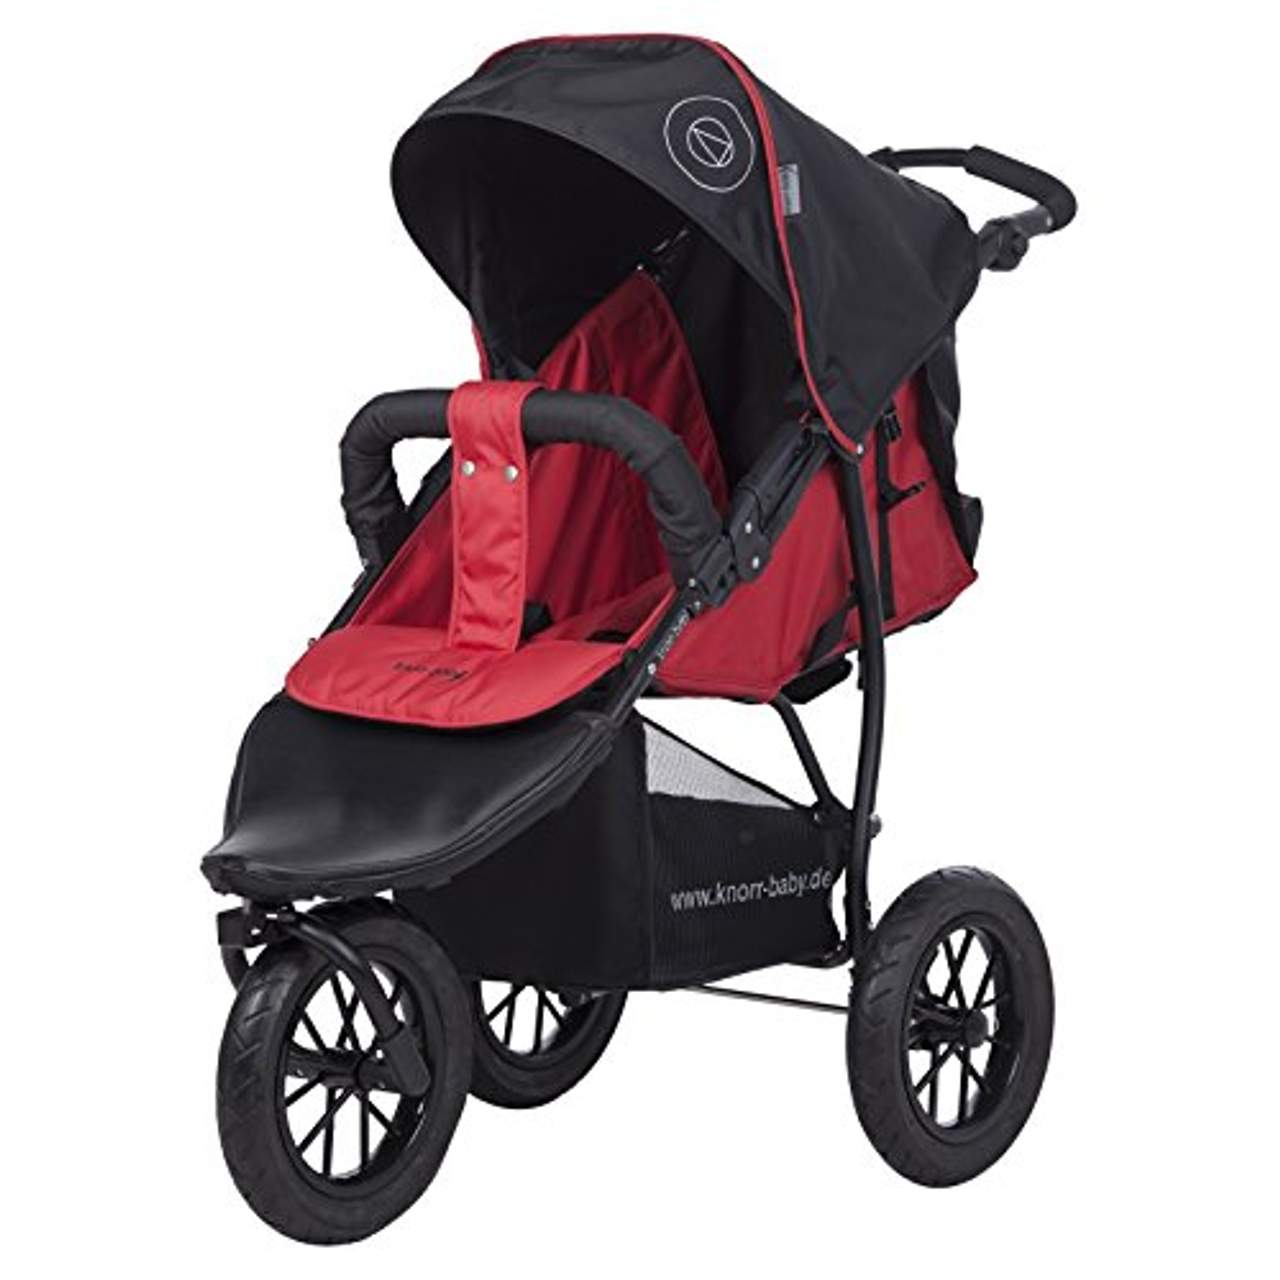 knorr-baby 883530 Joggy S rot